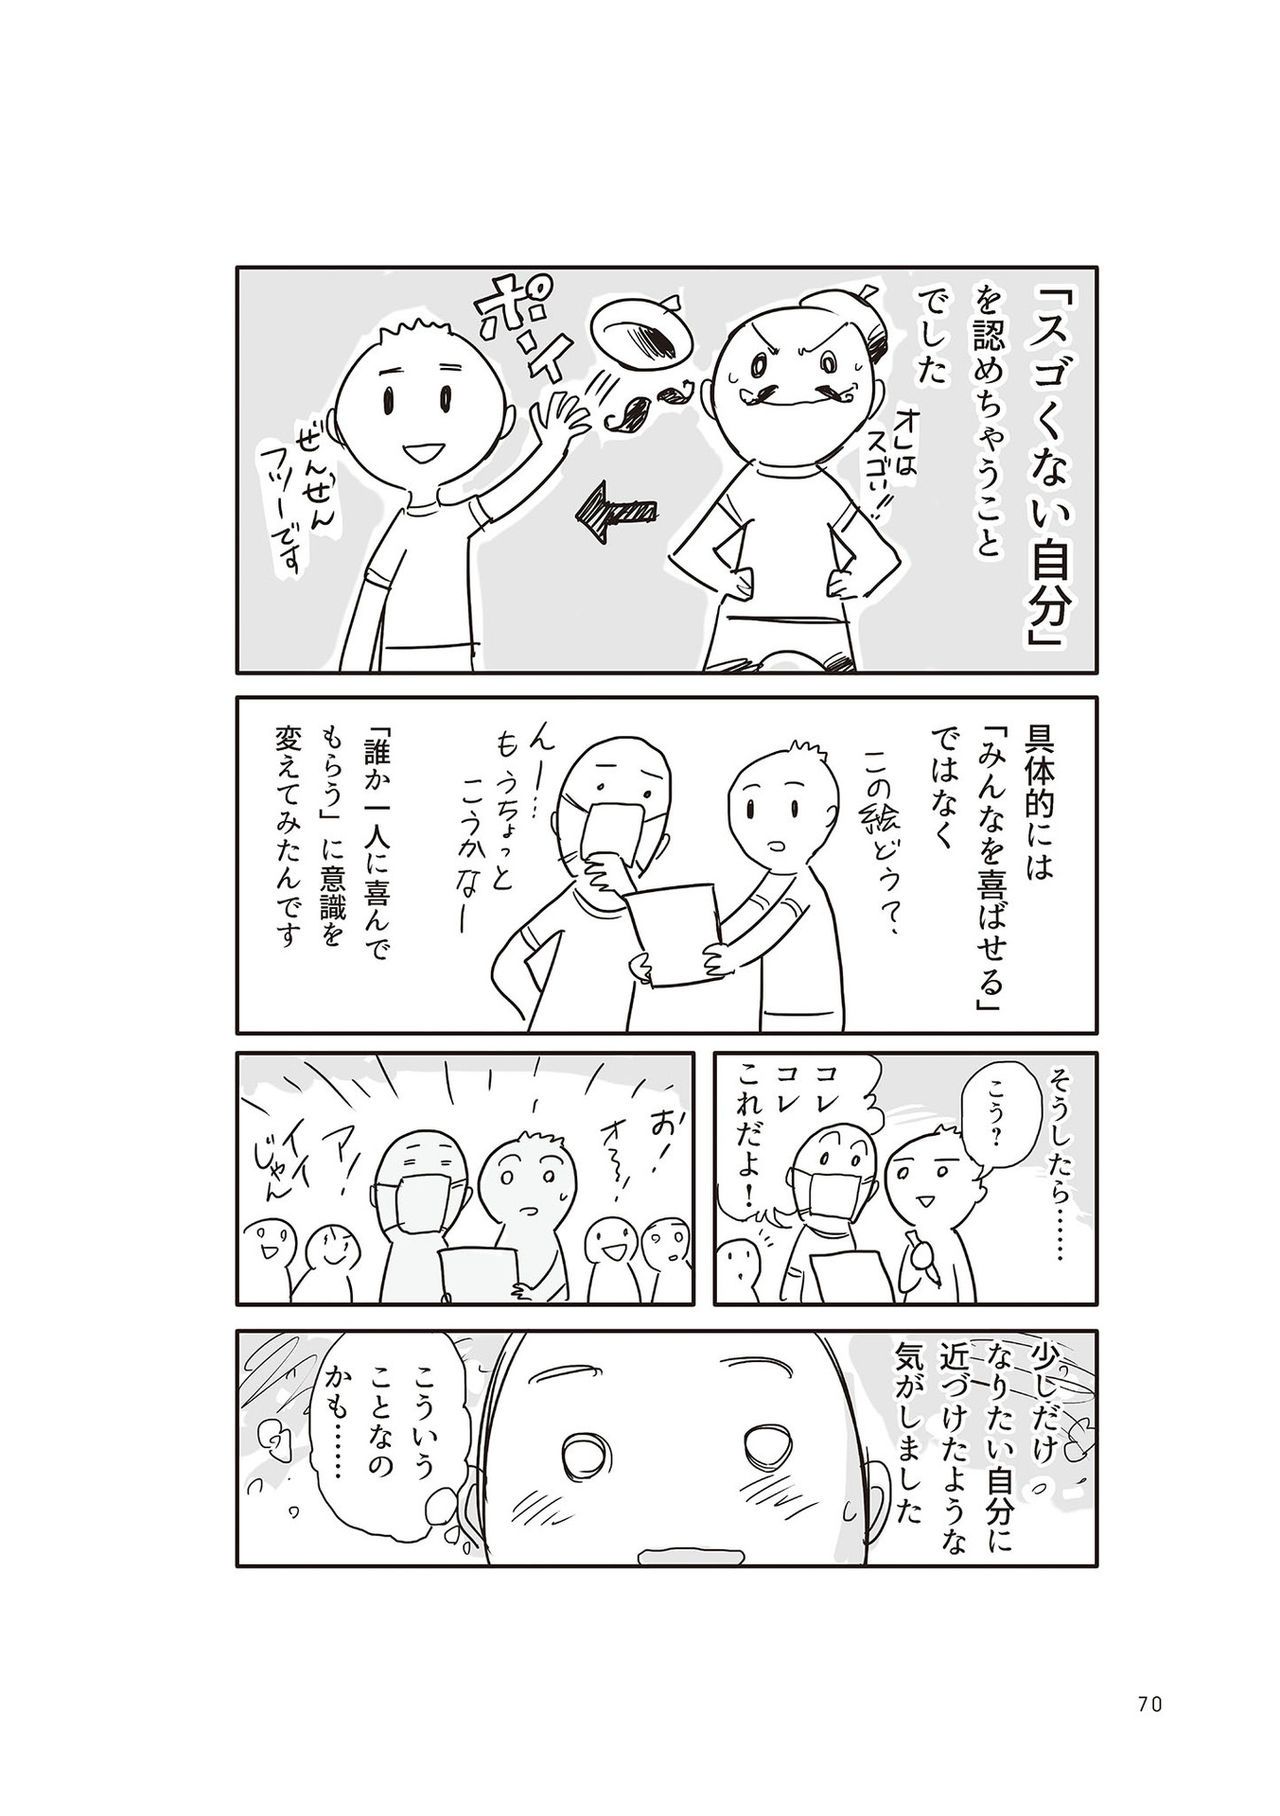 Prohibition of drawing well How to improve illustrations that are not smooth うまく描くの禁止 ツラくないイラスト上達法 71